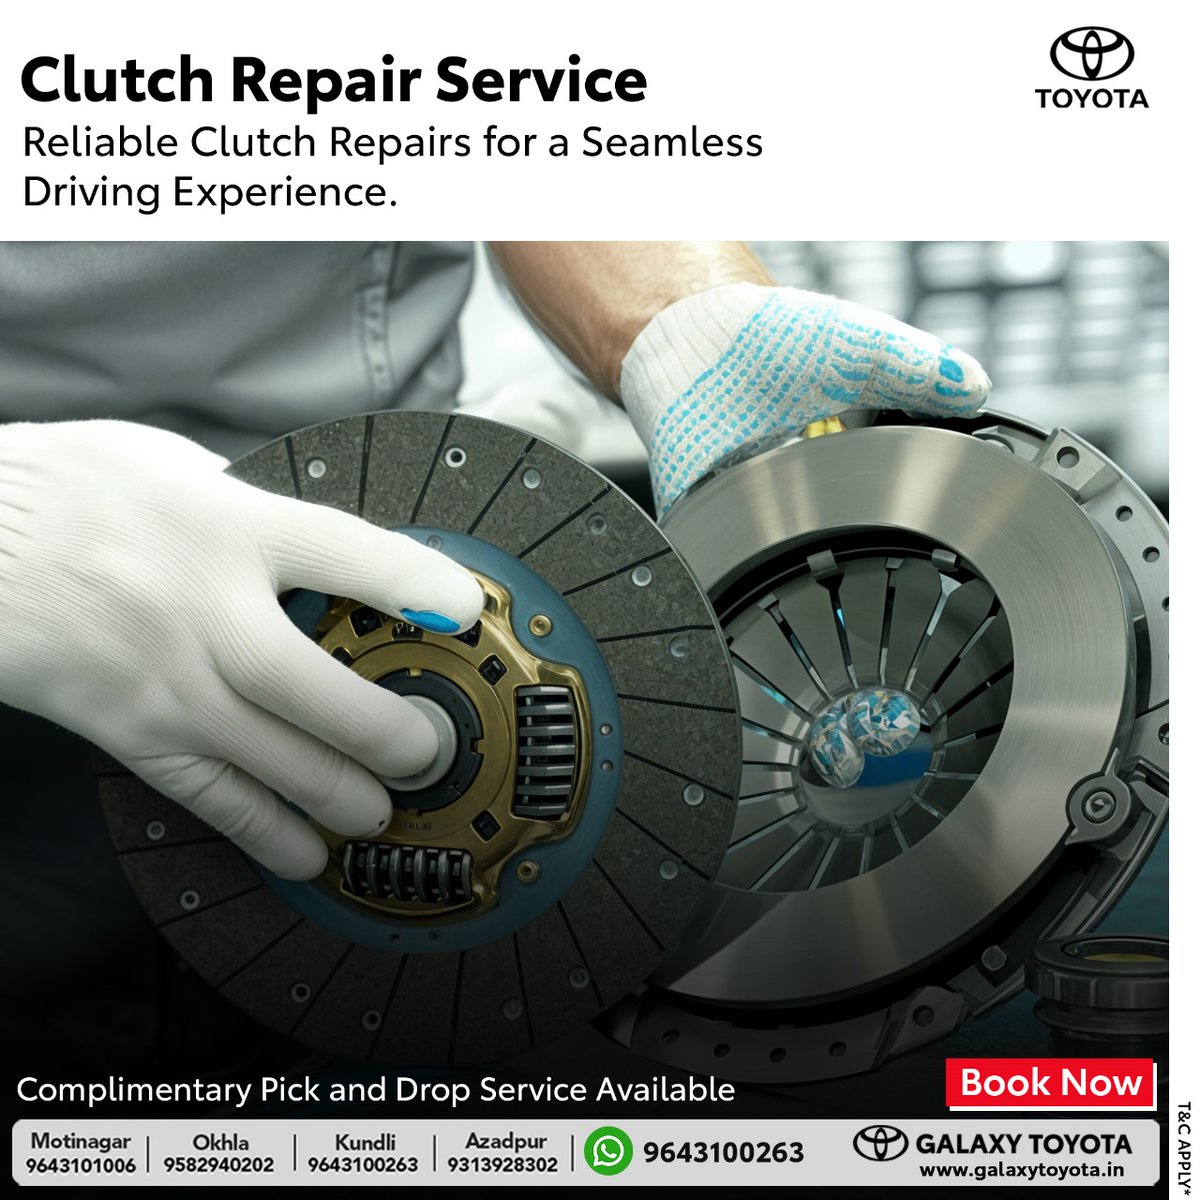 Don't let clutch troubles slow you down! 🚗🛠️

Experience smooth journeys ahead with our expert #CluchRepairService.

#CarRepair  #ToyotaCarService #GalaxyToyota